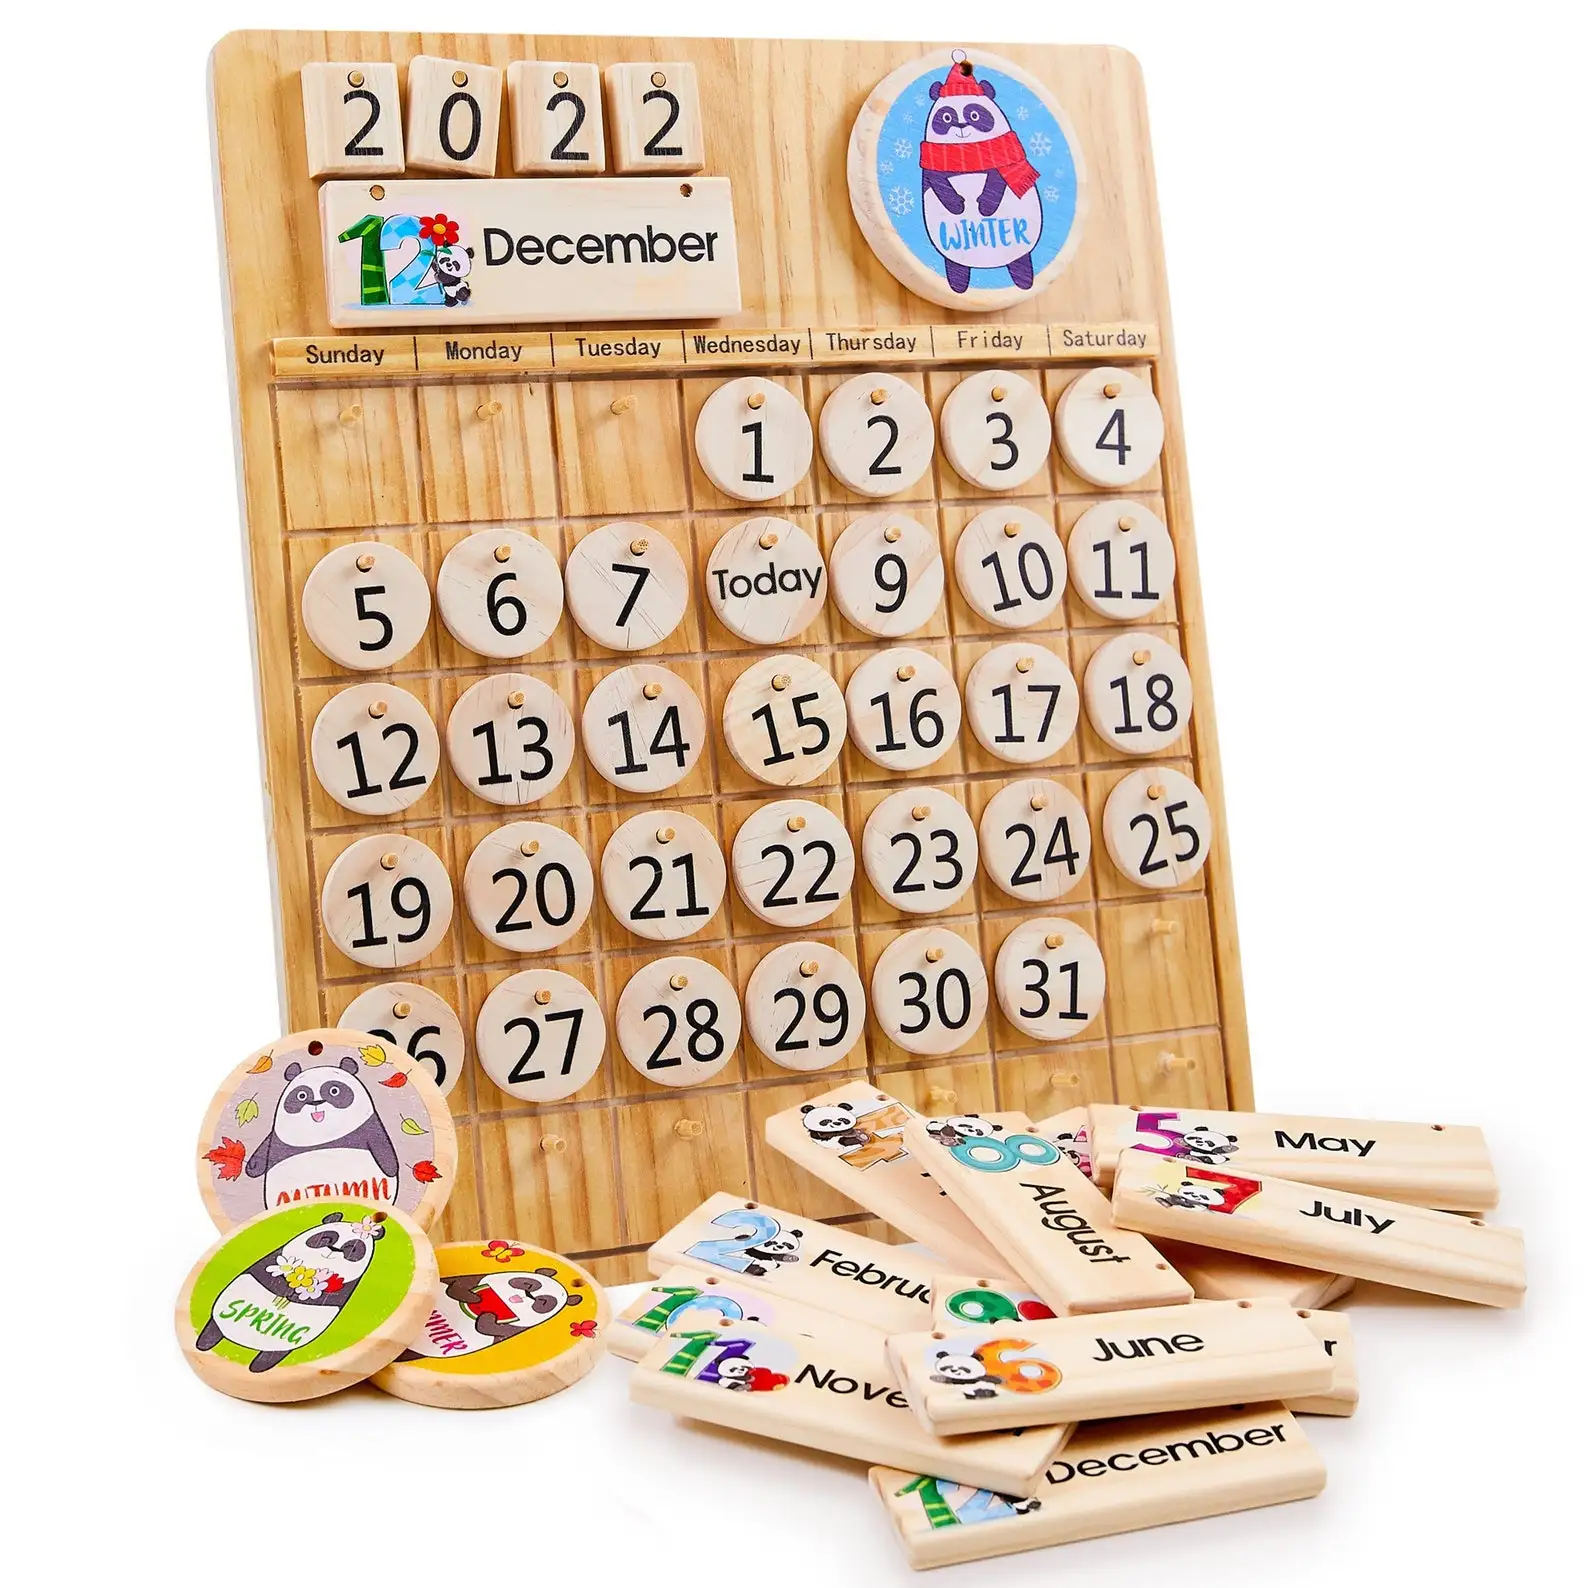 

Wooden Perpetual Calendar Toys for kids learning Seasons Months and Days of Year preschool and classroom toddlers STEM toy